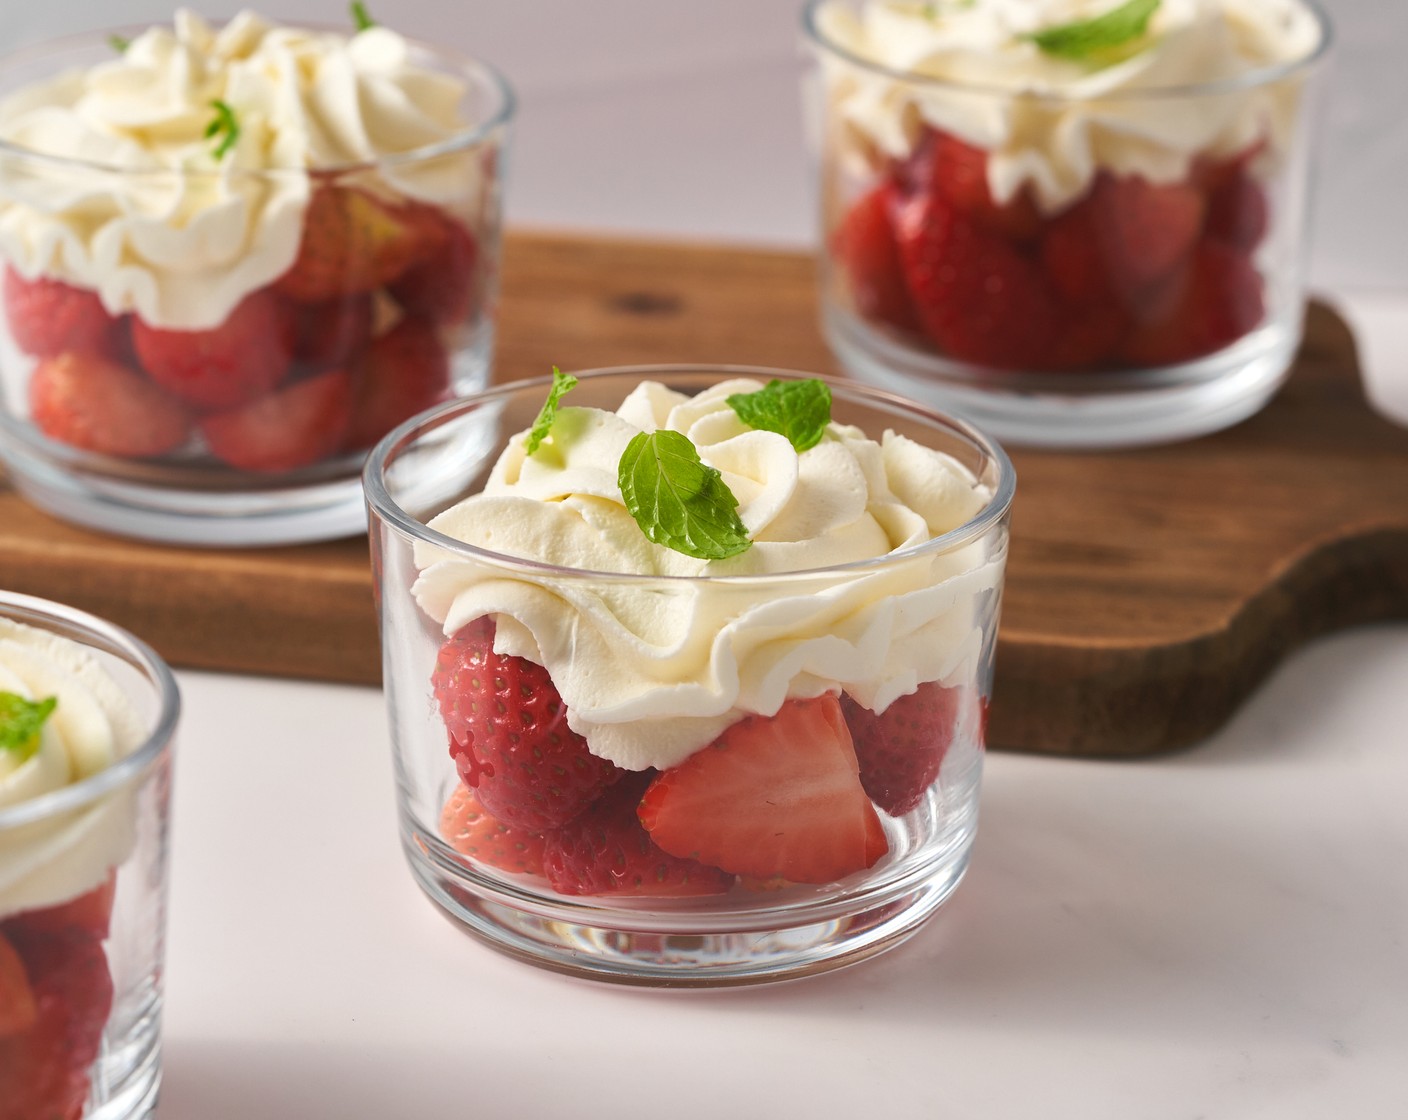 Strawberries with Mint Whipped Cream